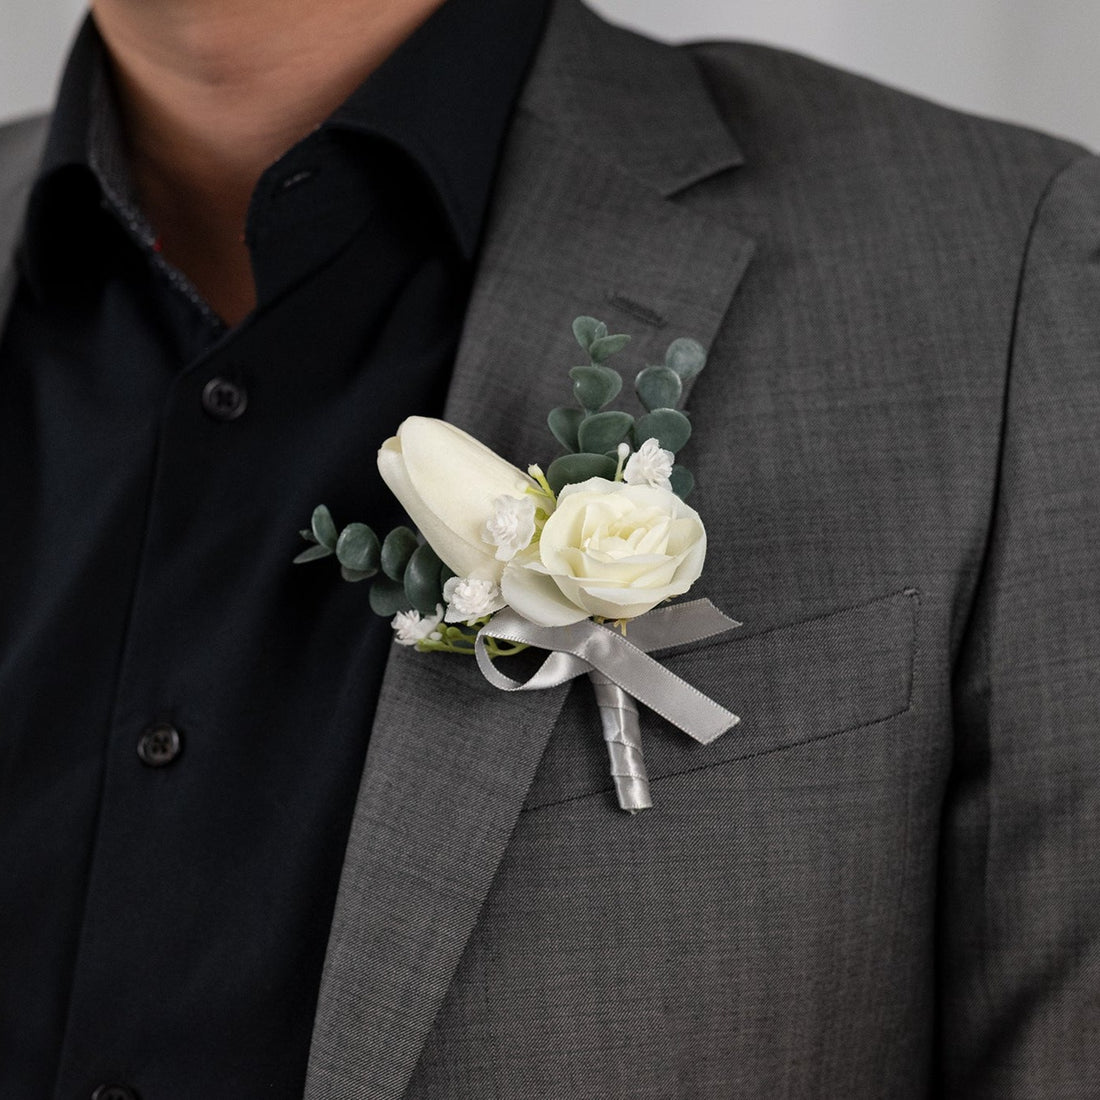 The elegant &quot;White Harmony Boutonniere&quot; features a stunning white rose and tulip, ensuring an unforgettable look. Perfect for weddings, celebrations, or formal events, its white composition adds a sleek touch of grace and class to any occasion.